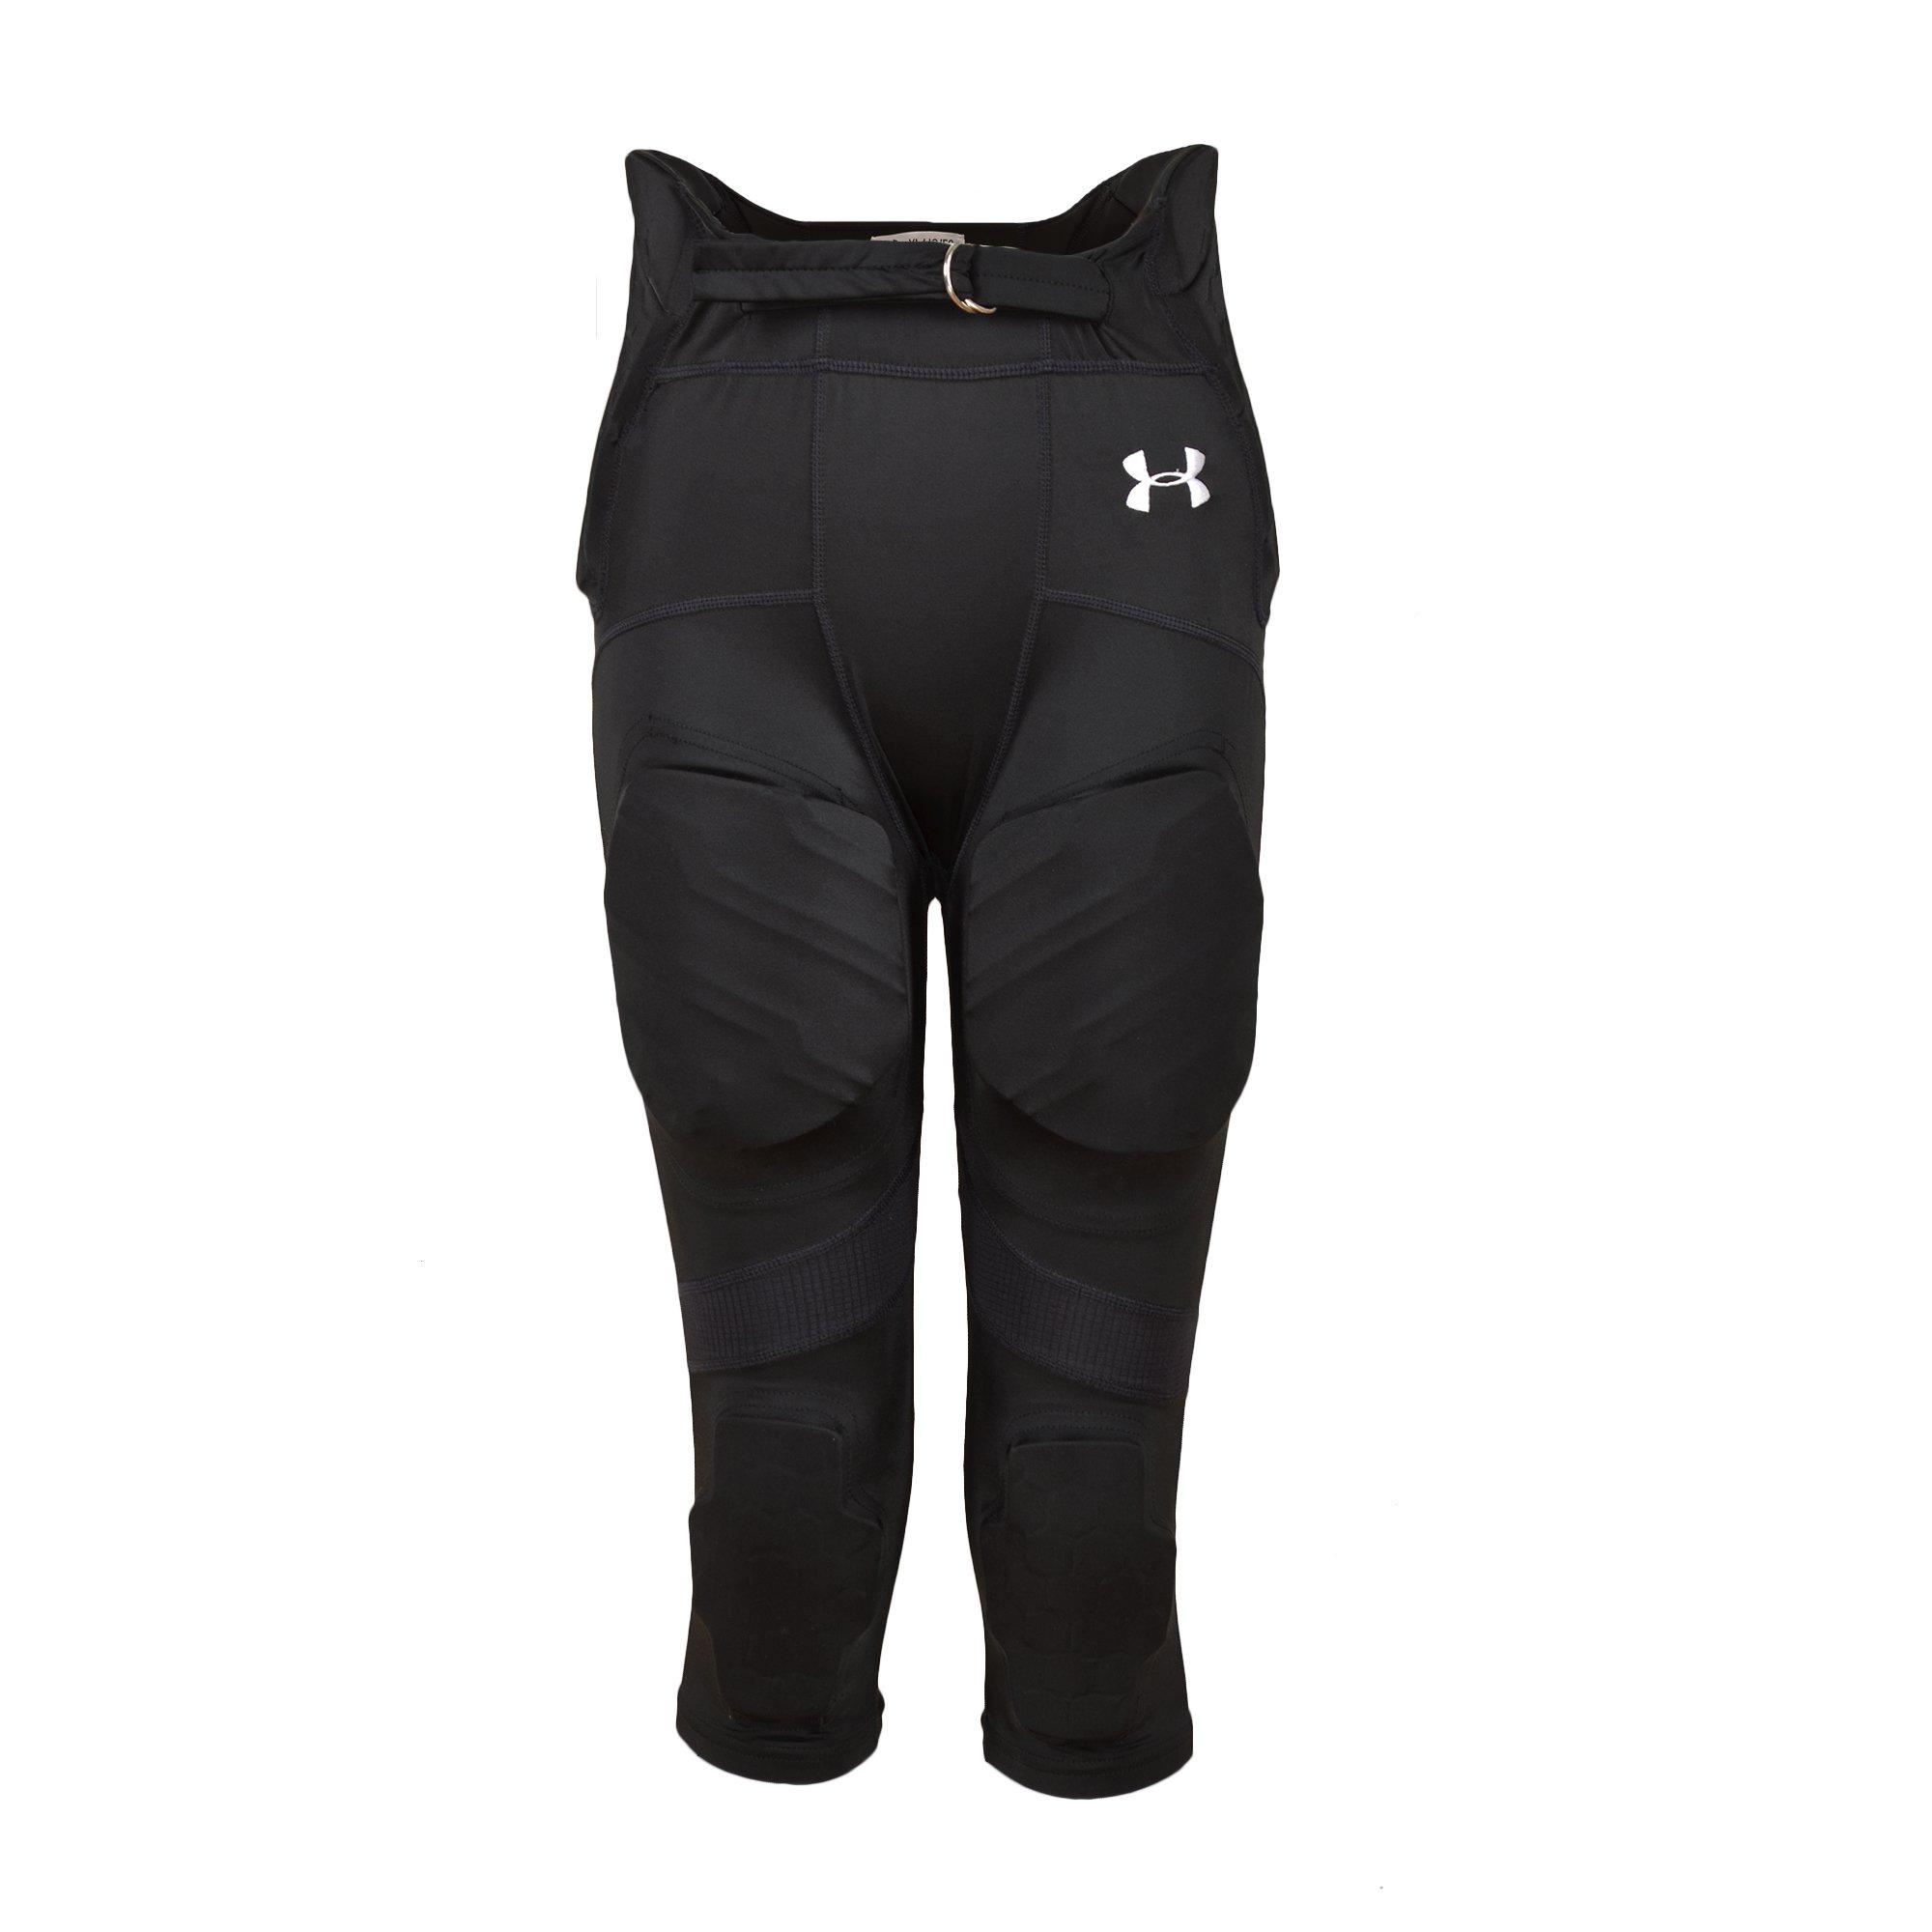 Under Armour Mens Integrated Football Pant